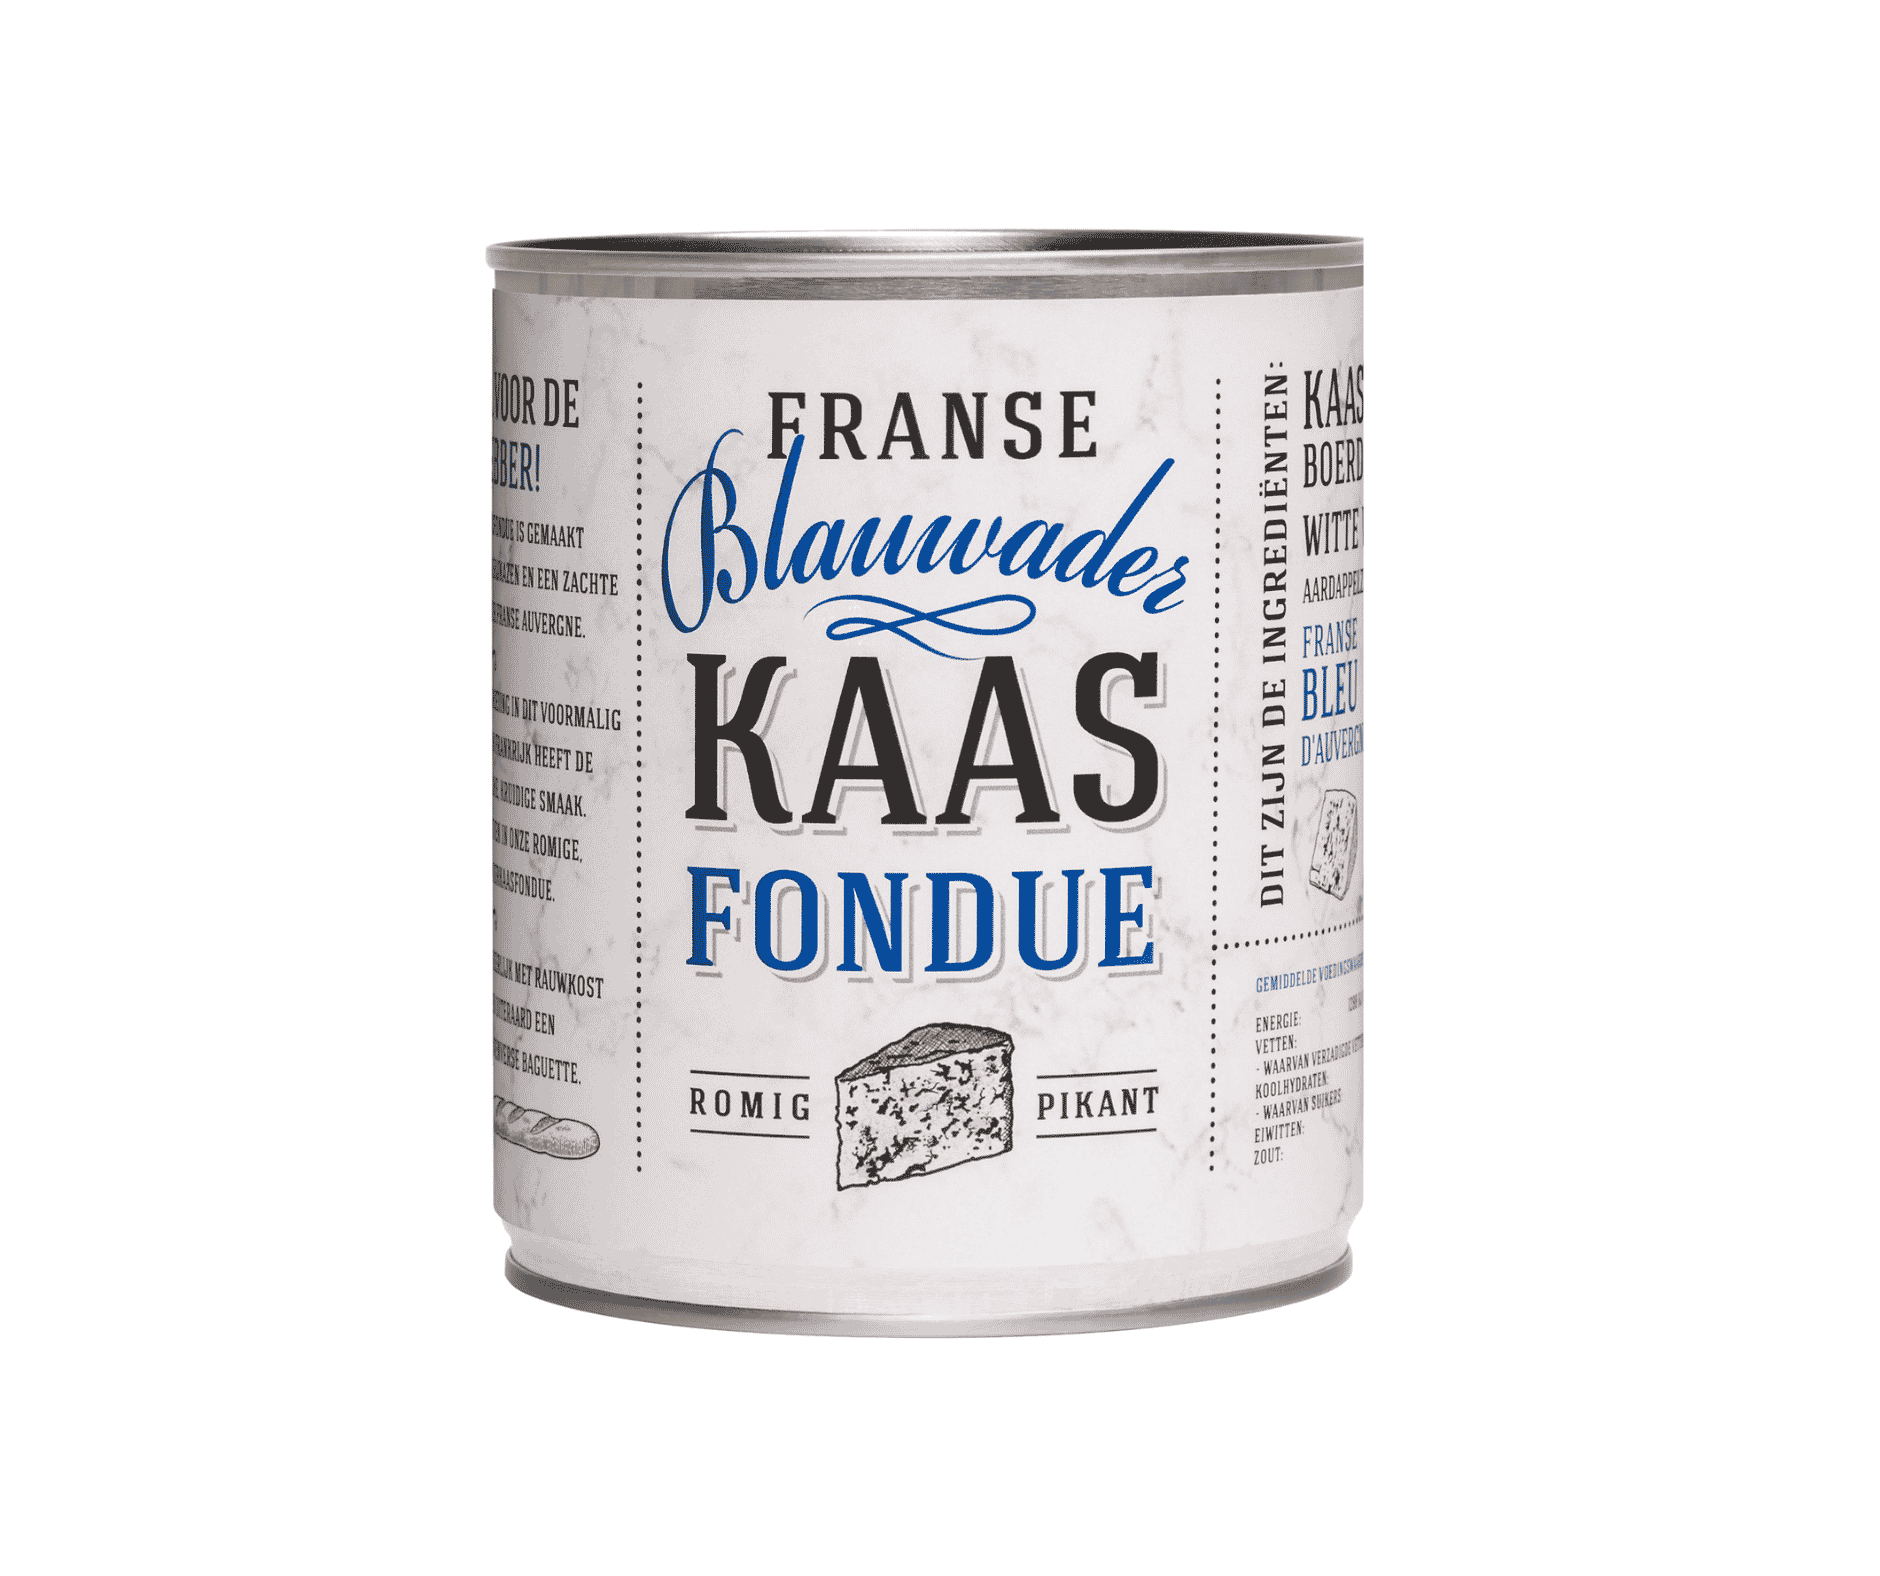 French Blue vein cheese fondue in a 750g can